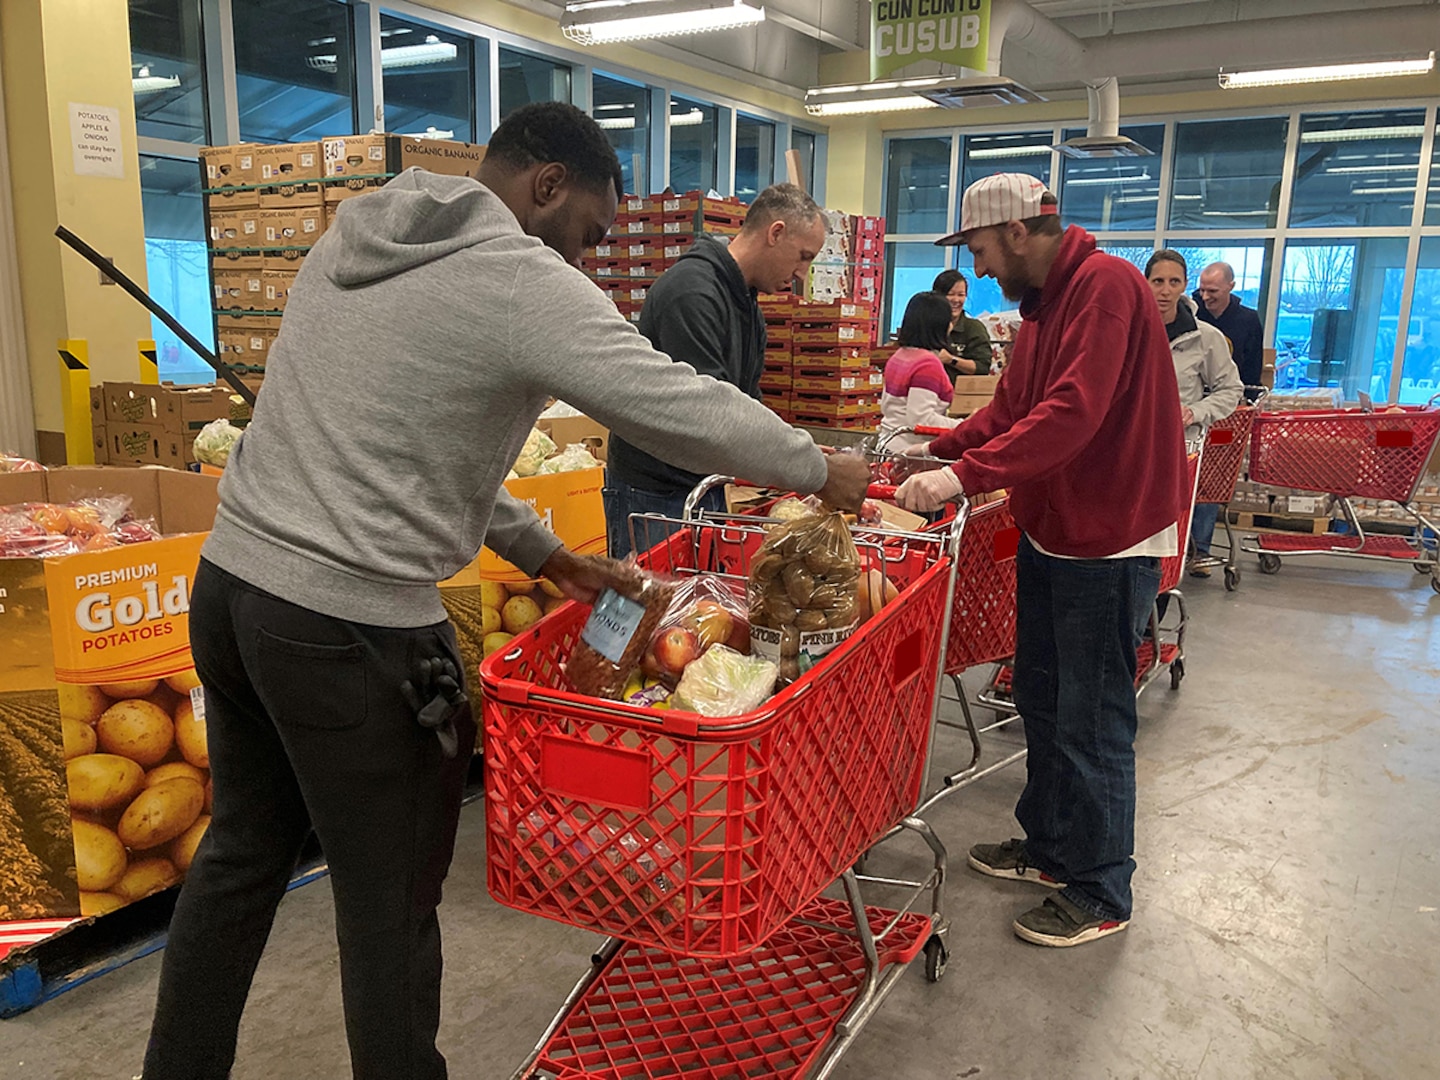 Several people wearing casual clothing load shopping carts full of food in a warehouse.